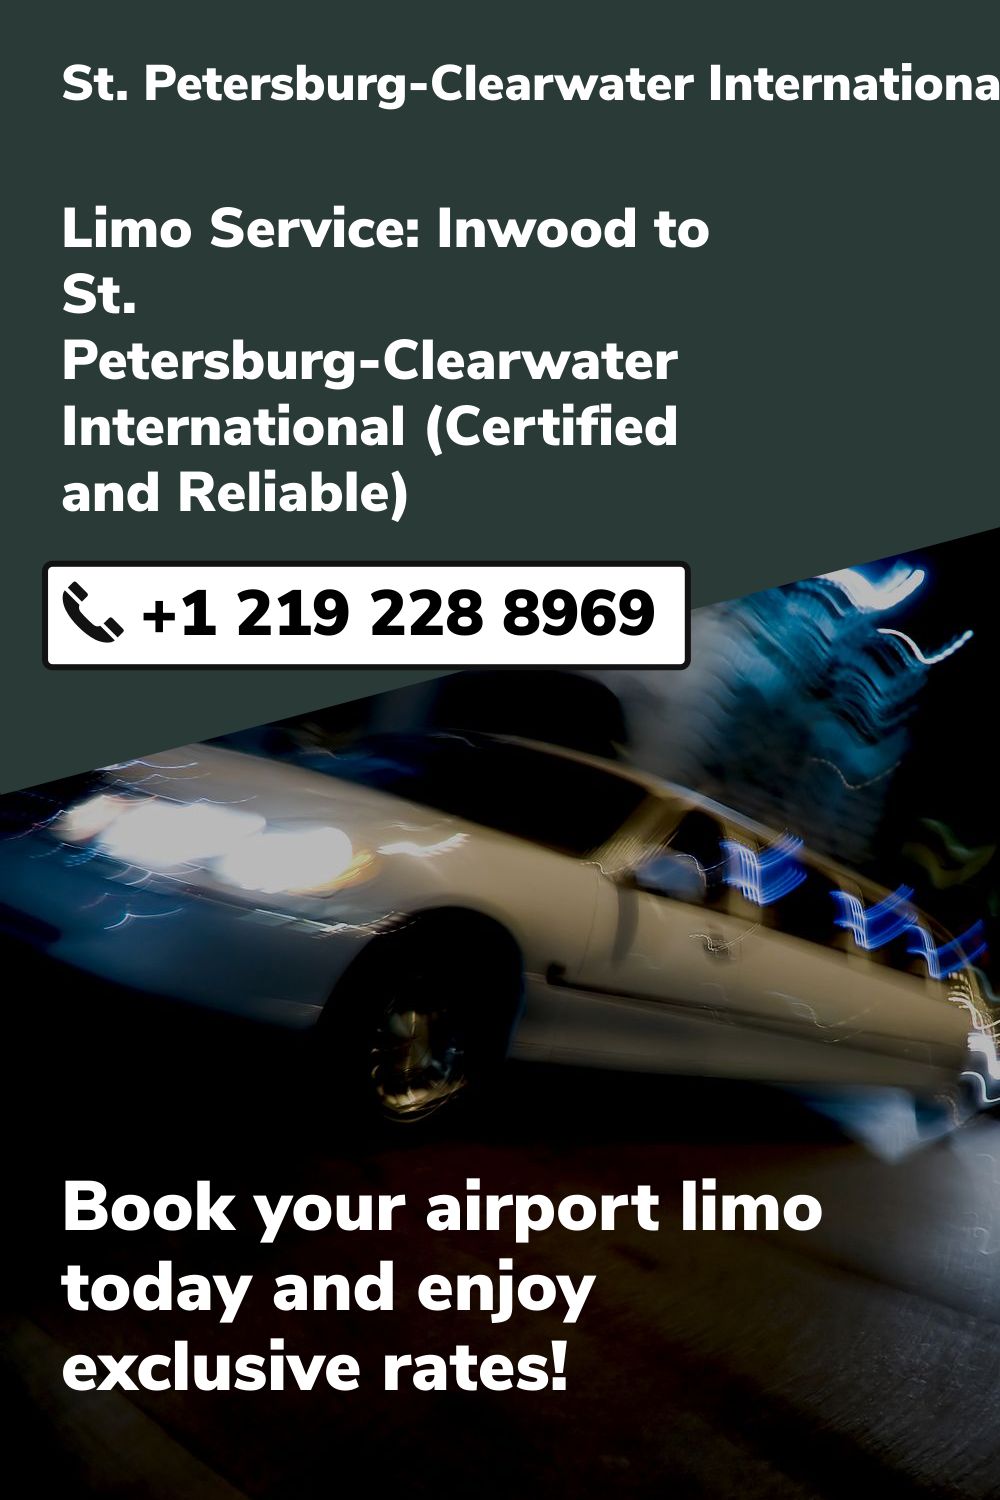 St. Petersburg-Clearwater International Airport Limo